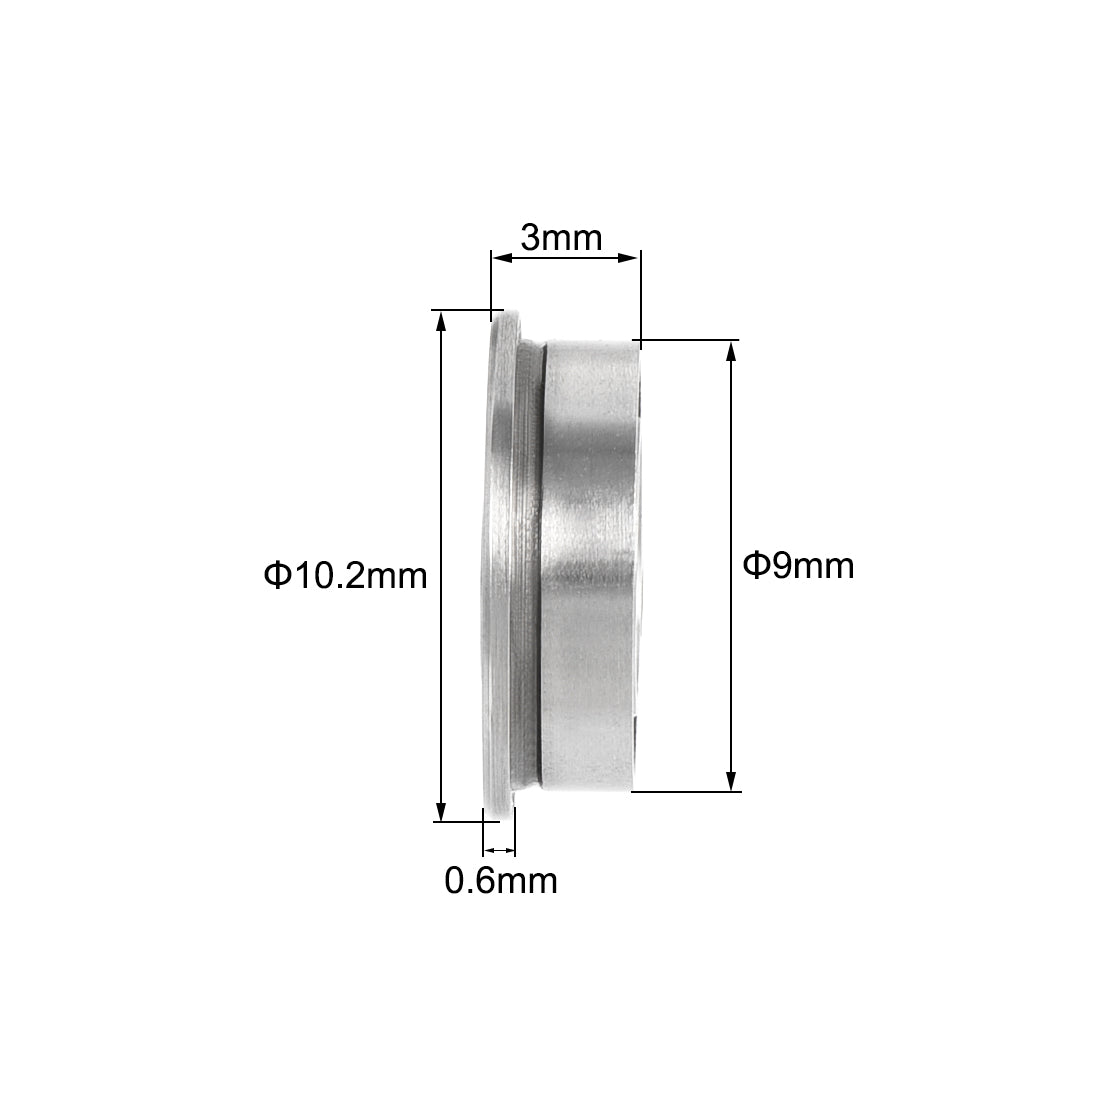 uxcell Uxcell MF95-2RS Flange Ball Bearing 5x9x3mm Double Sealed Chrome Steel Bearing 5pcs